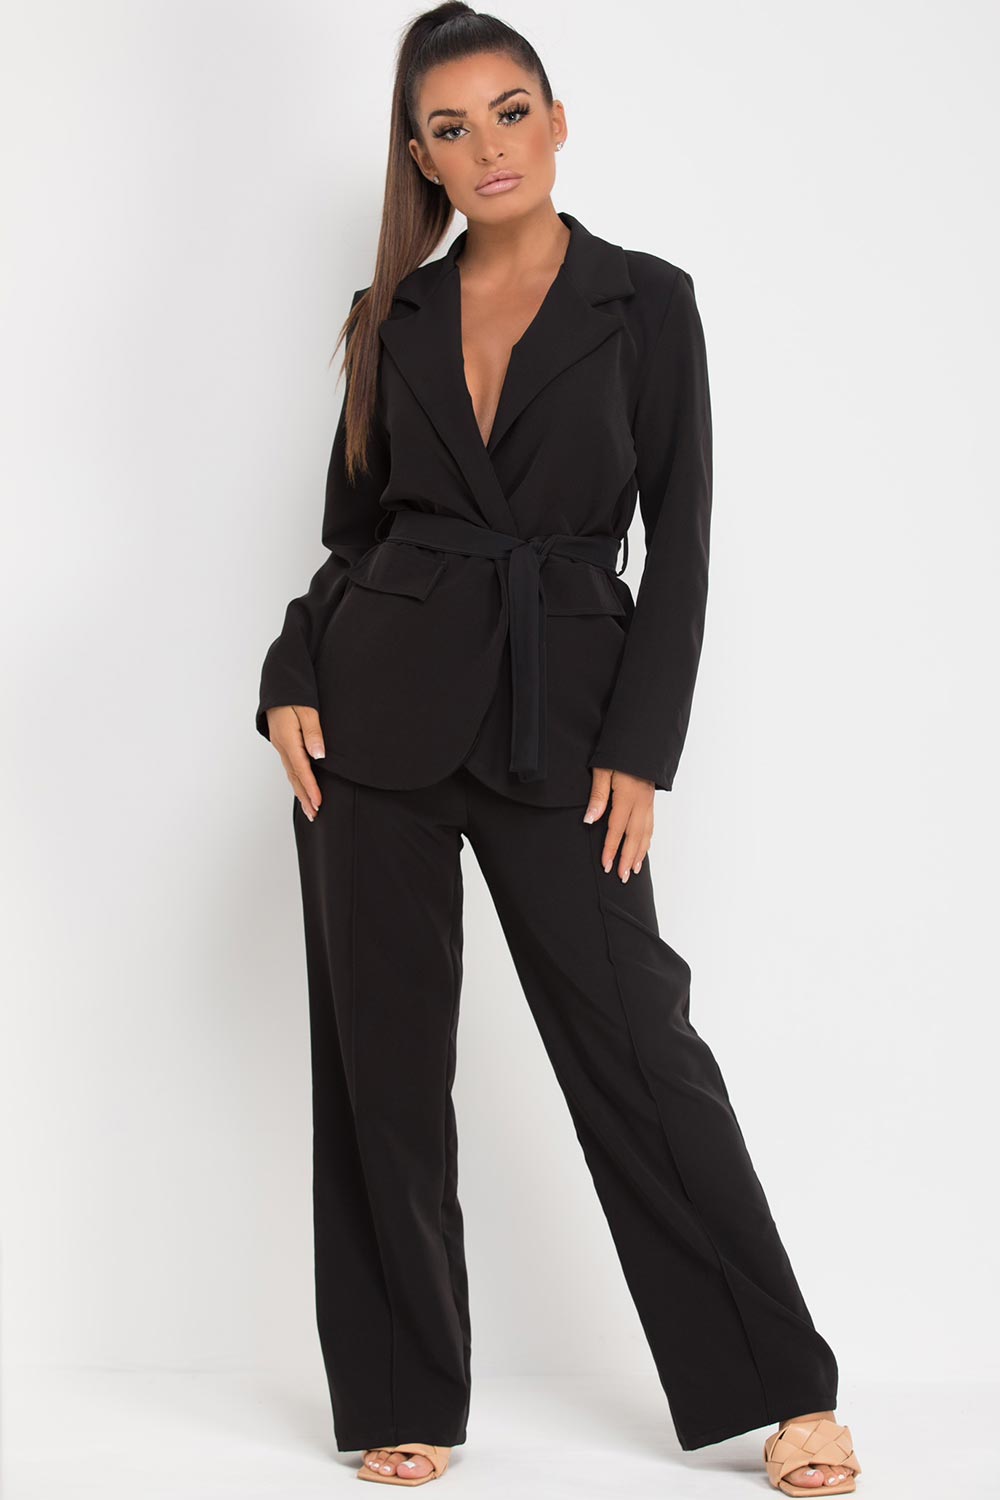 ASOS EDITION oversized blazer and wide leg trouser set in stone